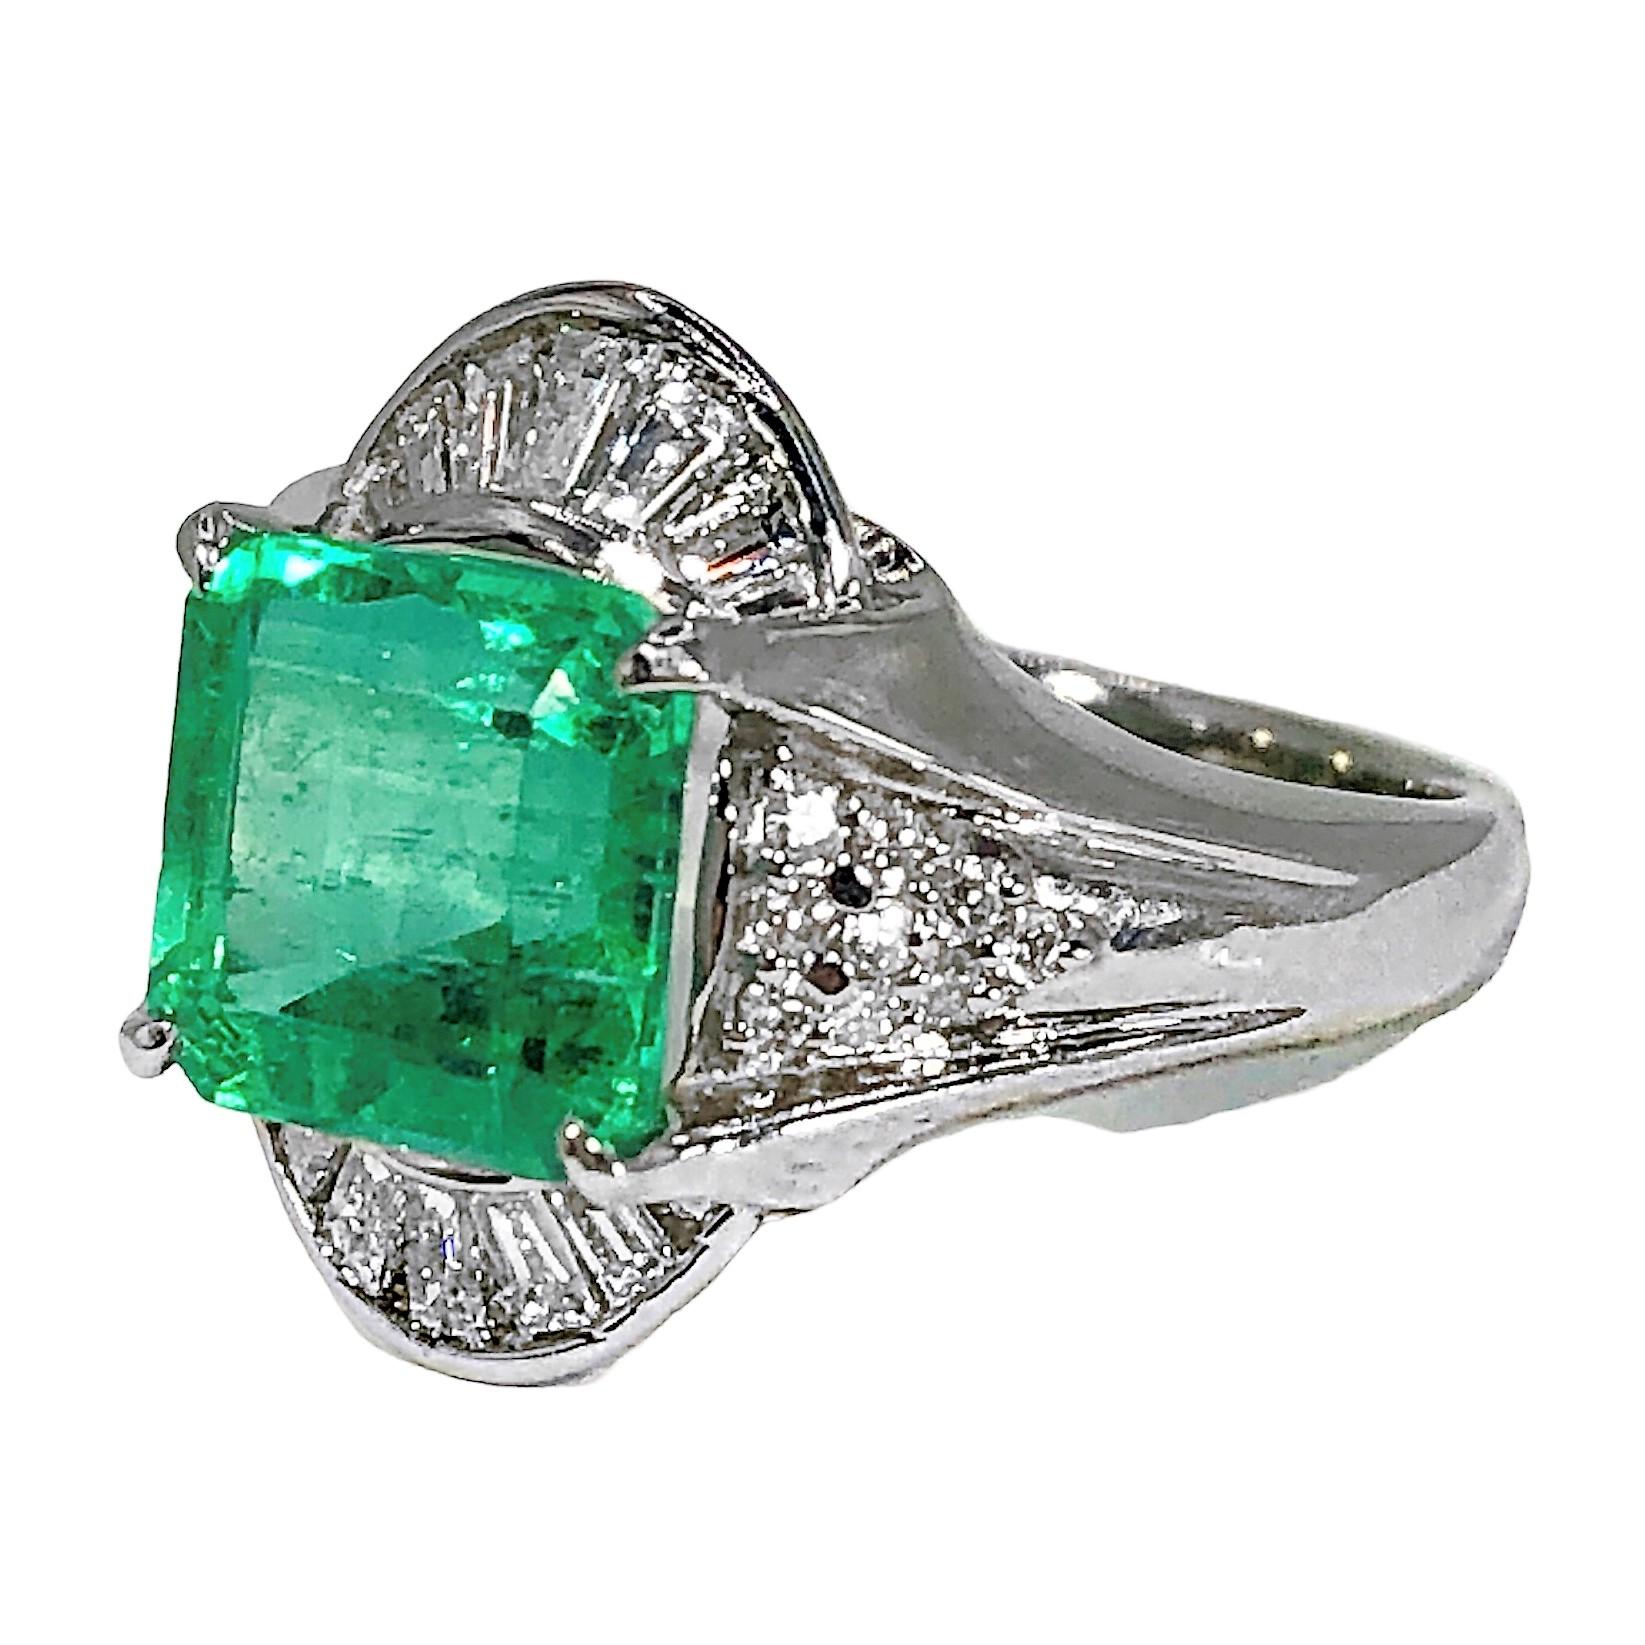 Women's Contemporary Platinum Ring with 3.48ct Emerald and Diamonds